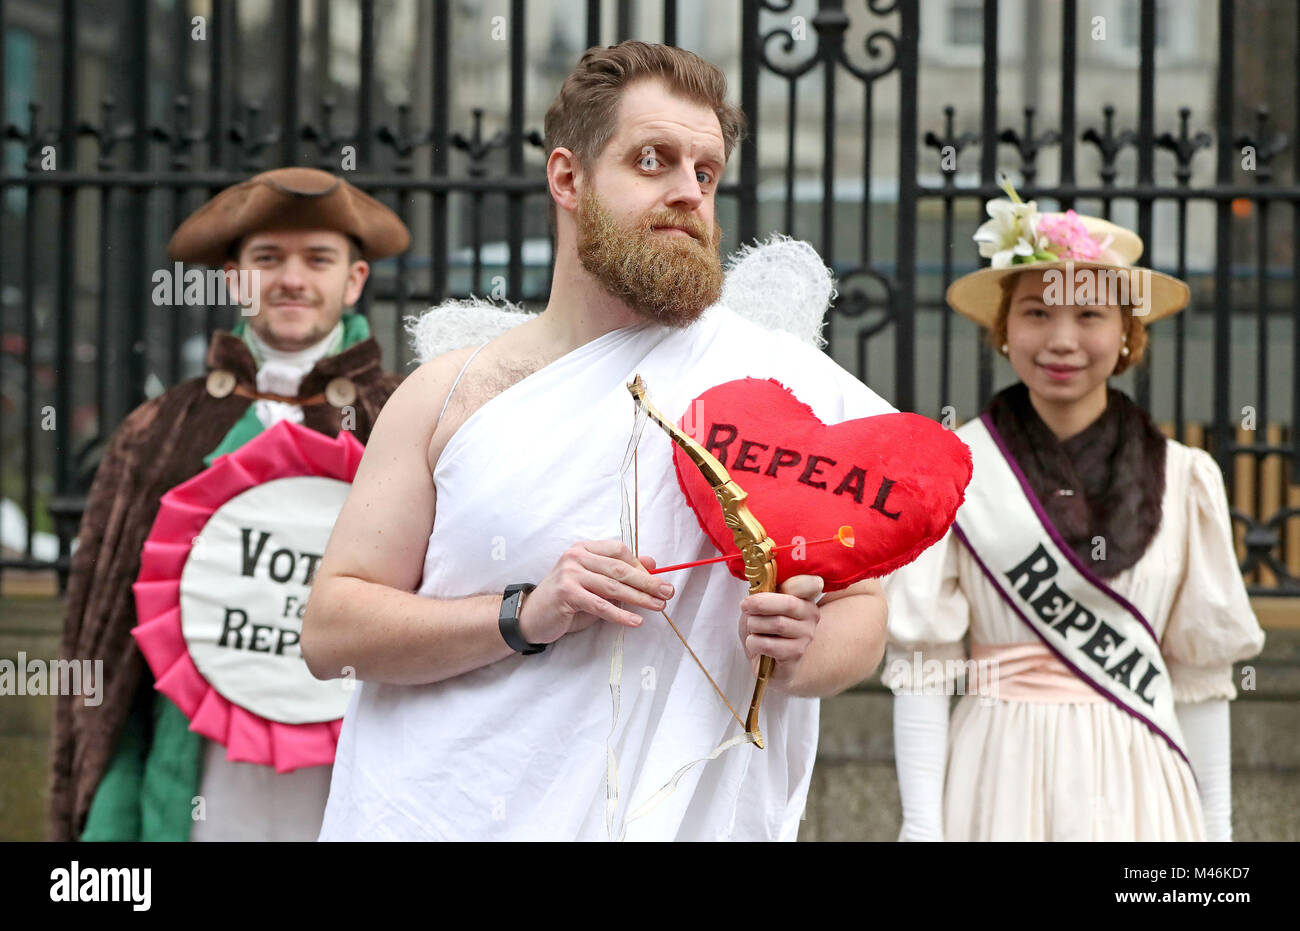 Abortion Rights campaigners, (left to right) Morgan Maher, Adam Murray and Lute Alraad during a protest outside Leinster House in Dublin, which called for a repeal of the 8th Amendment in the Irish Constitution. Stock Photo